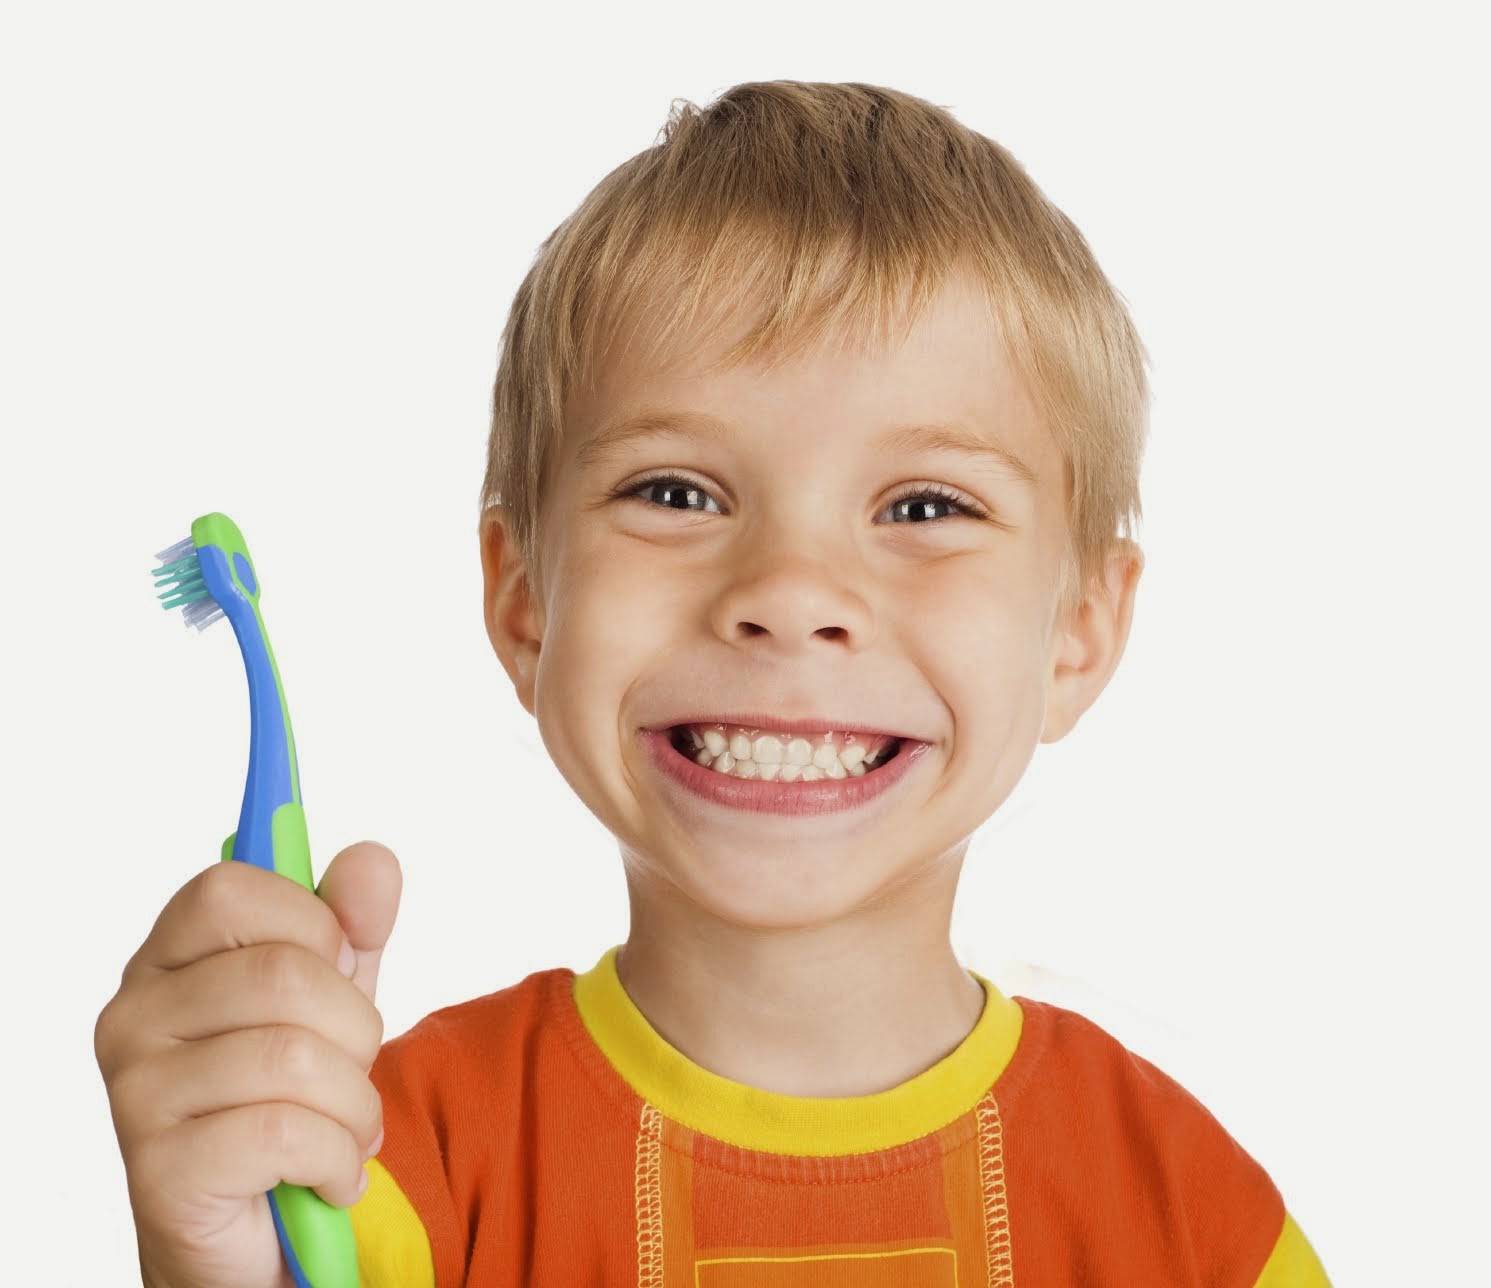 ... kids: Teach the kids to brush their teeth every day - Go Healthy Tips